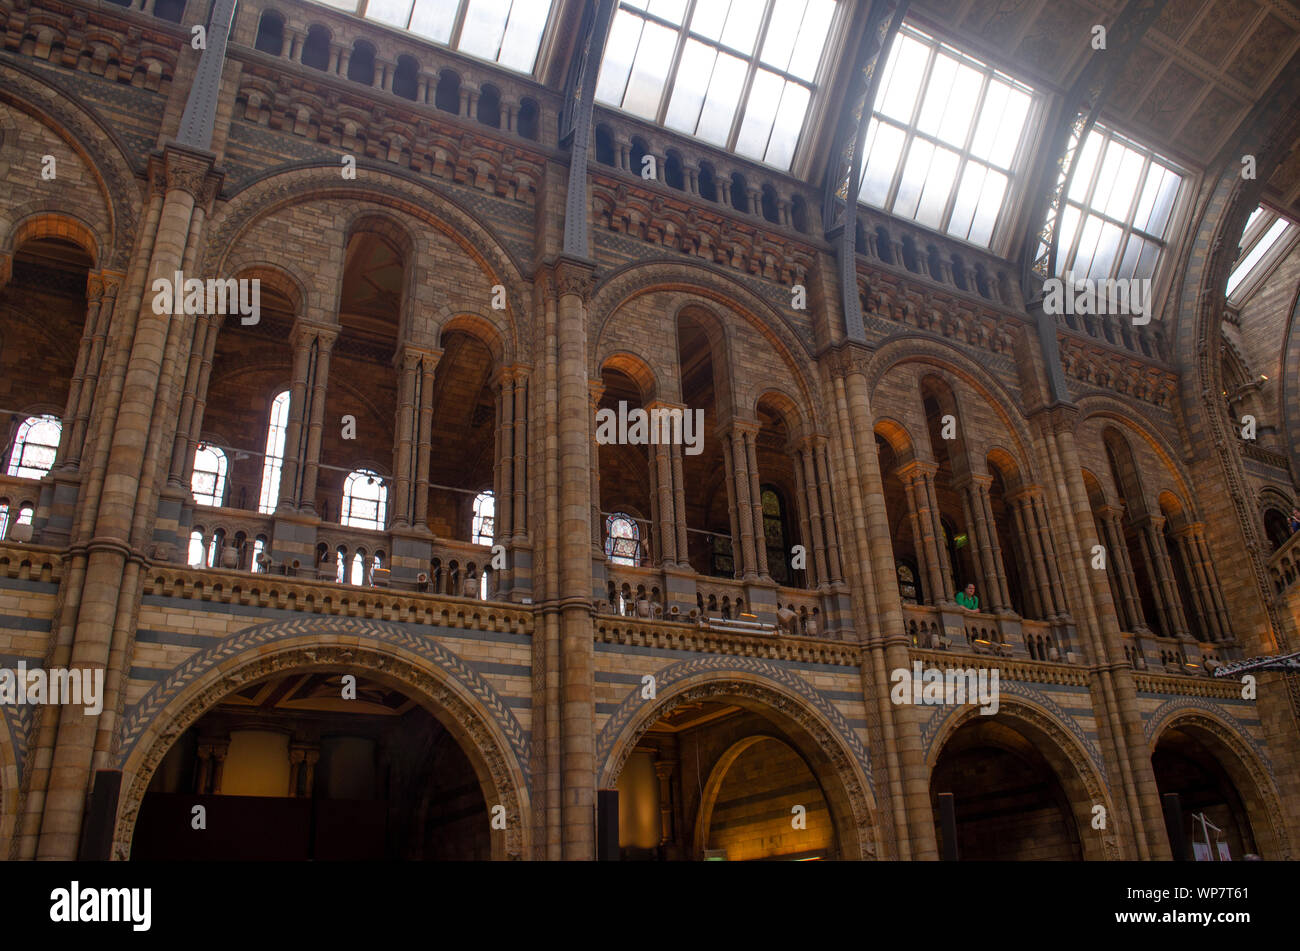 Interior details of the Natural History Museum, London. Stock Photo